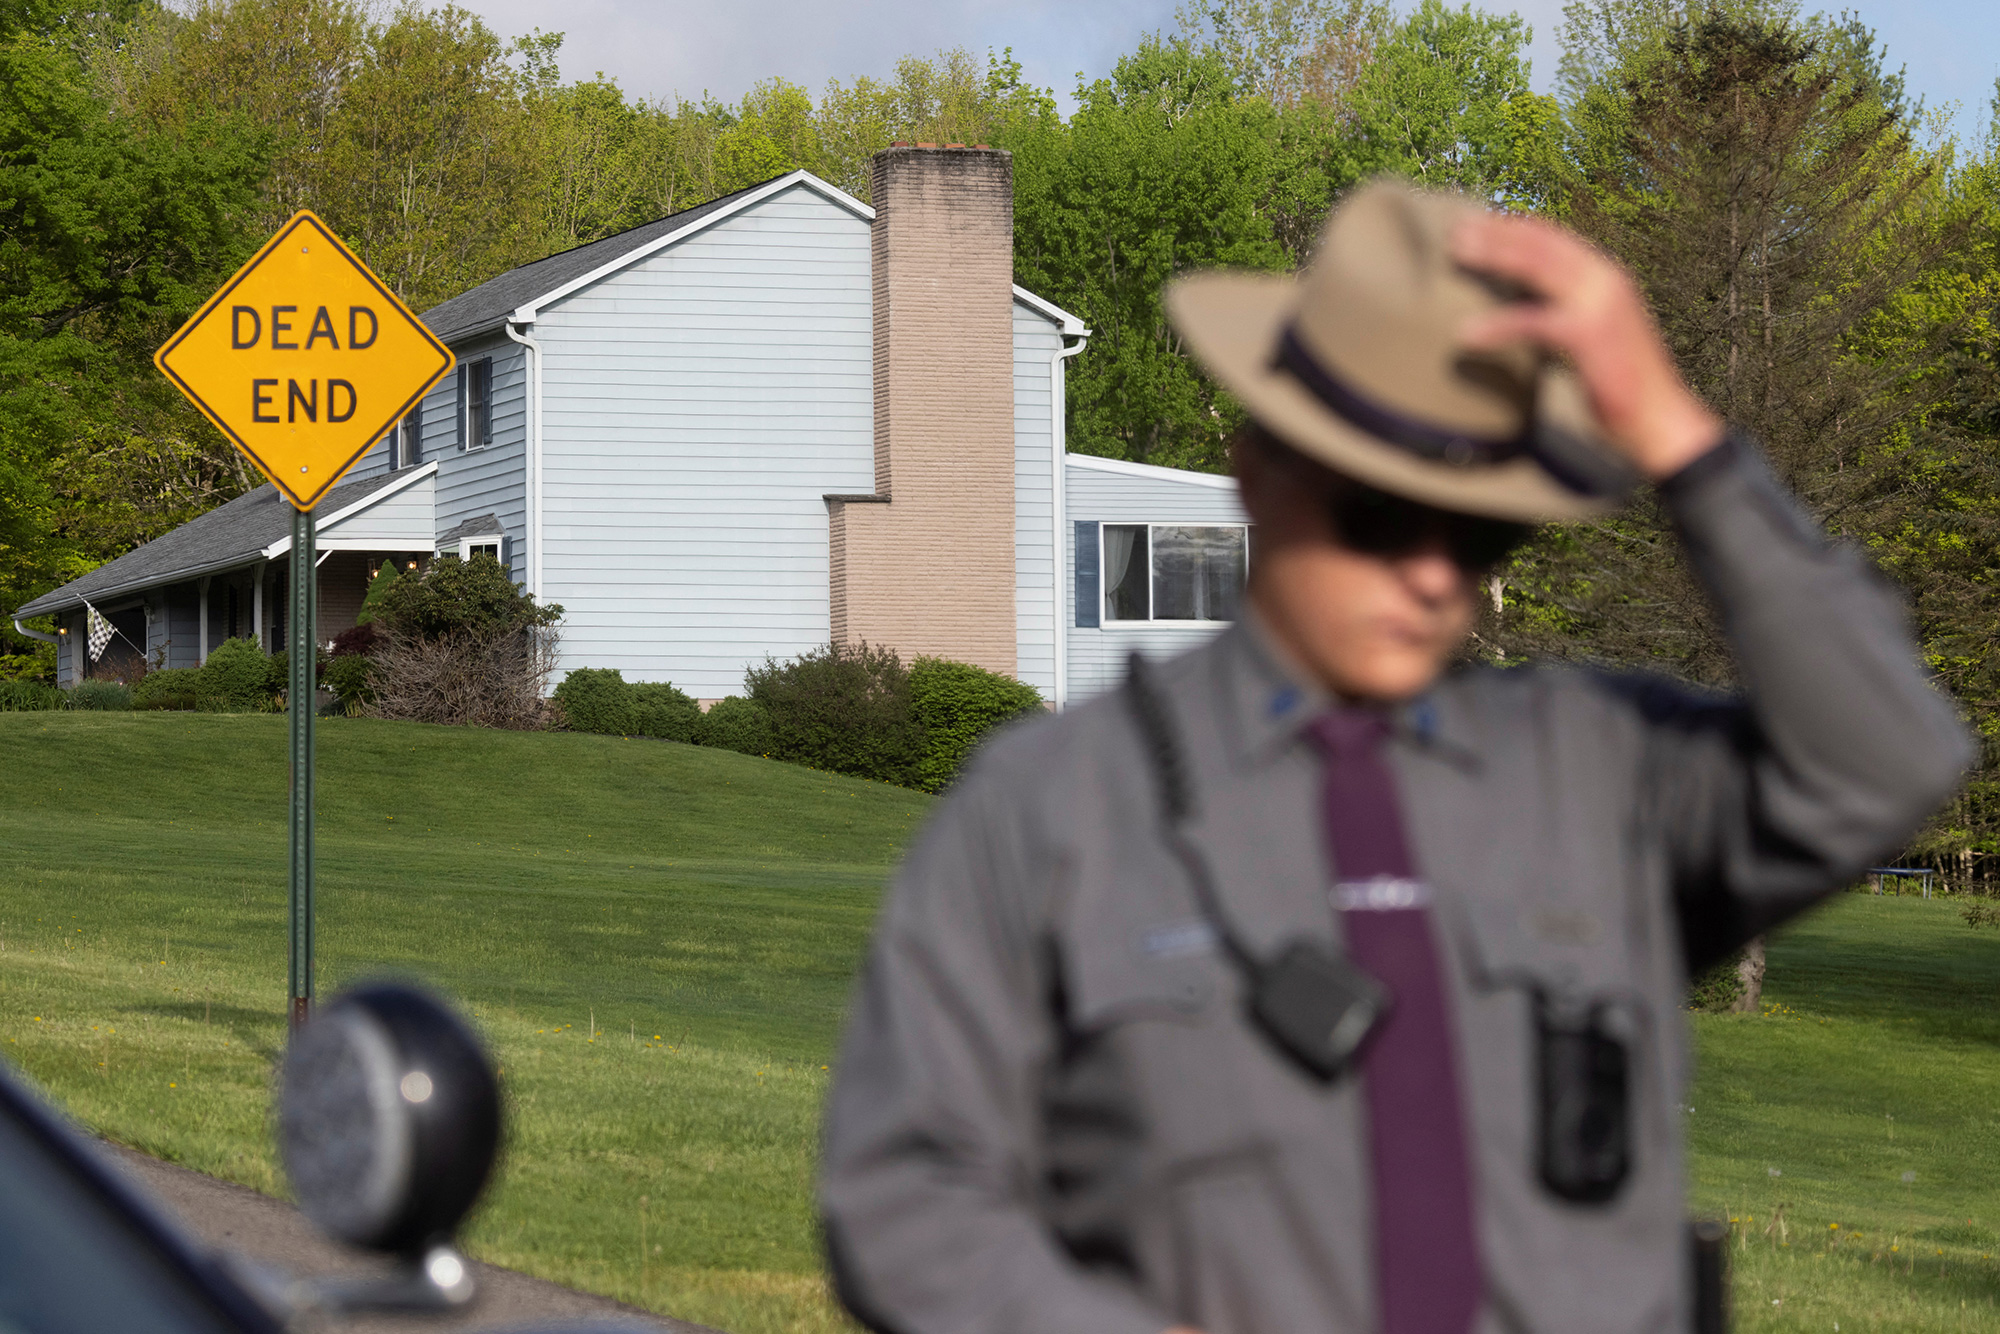 Law enforcement personnel are seen at the home of Buffalo supermarket shooting suspect Payton Gendron in Conklin, New York, on May 15.